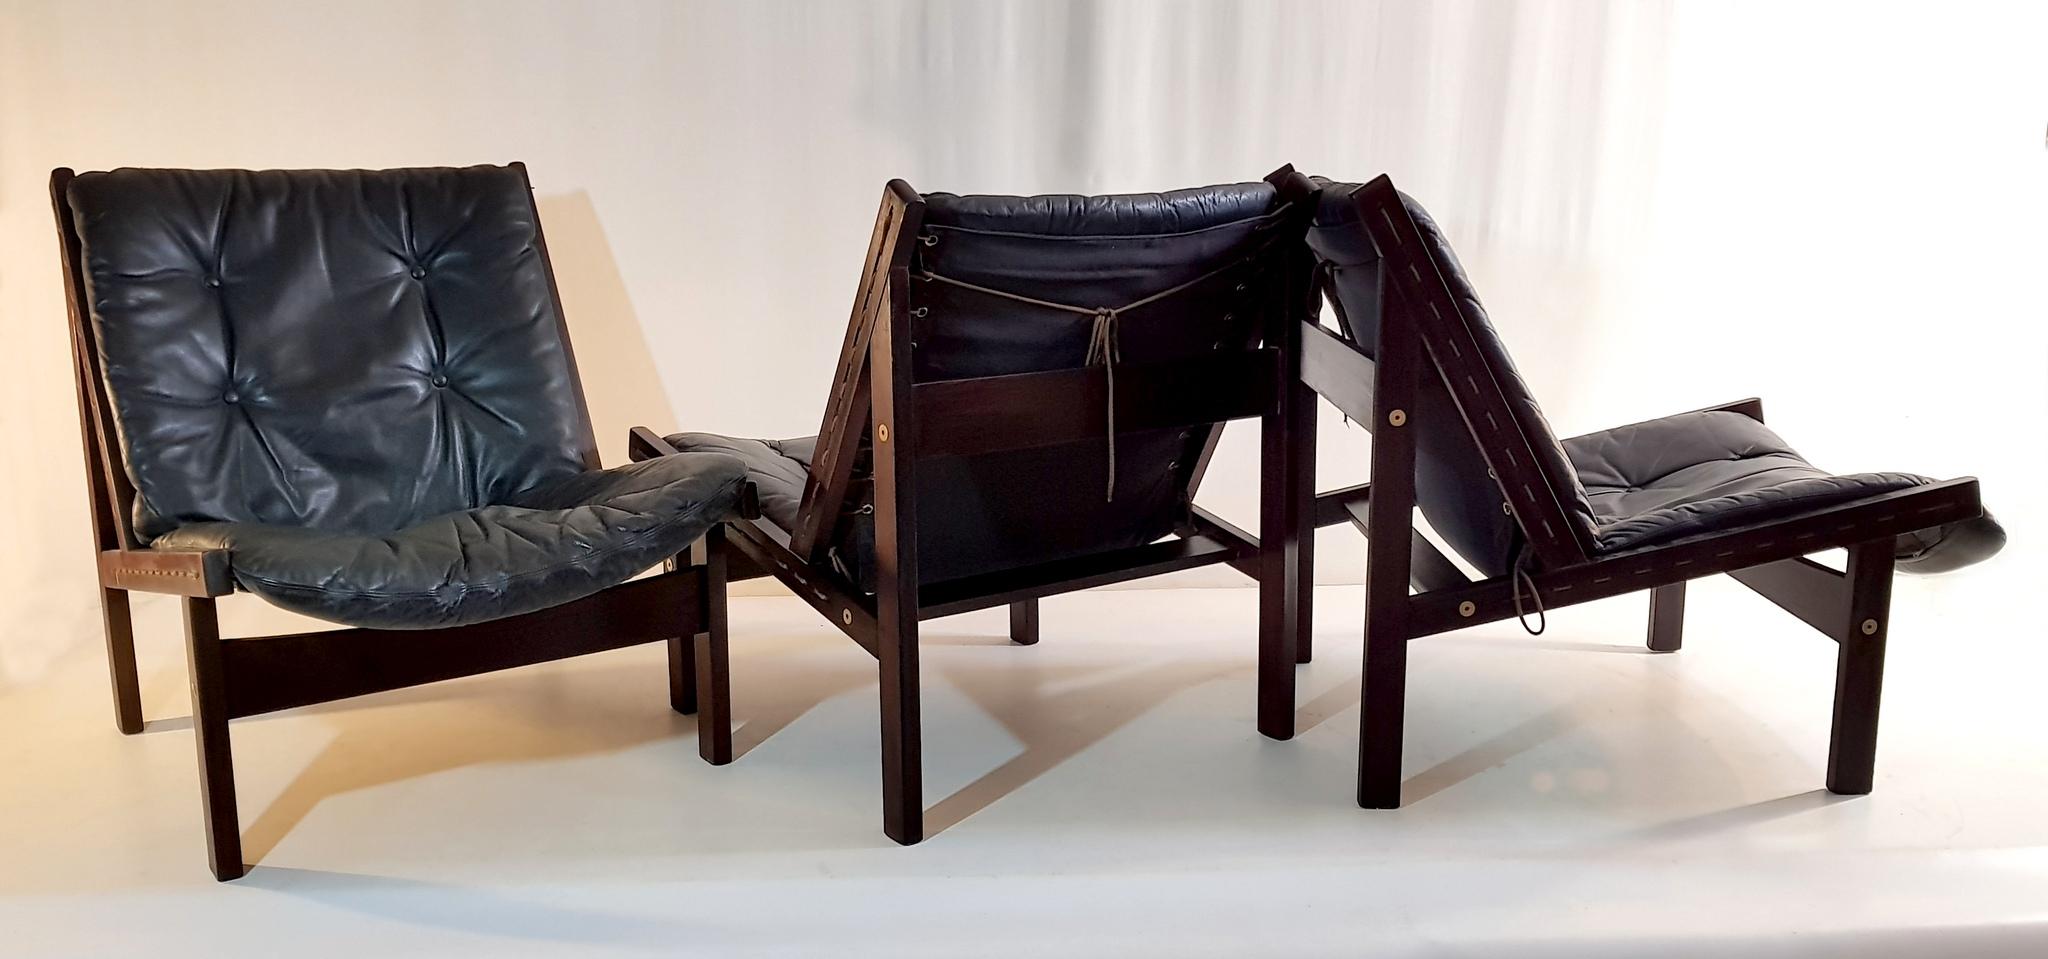 Three easy chairs in black leather model Hunter designed by Torbjørn Afdal and produced by Bruksbo / Stranda møbelindustri, Norway. In good vintage condition. Can be placed together as a sofa or separately. No tears or rips.